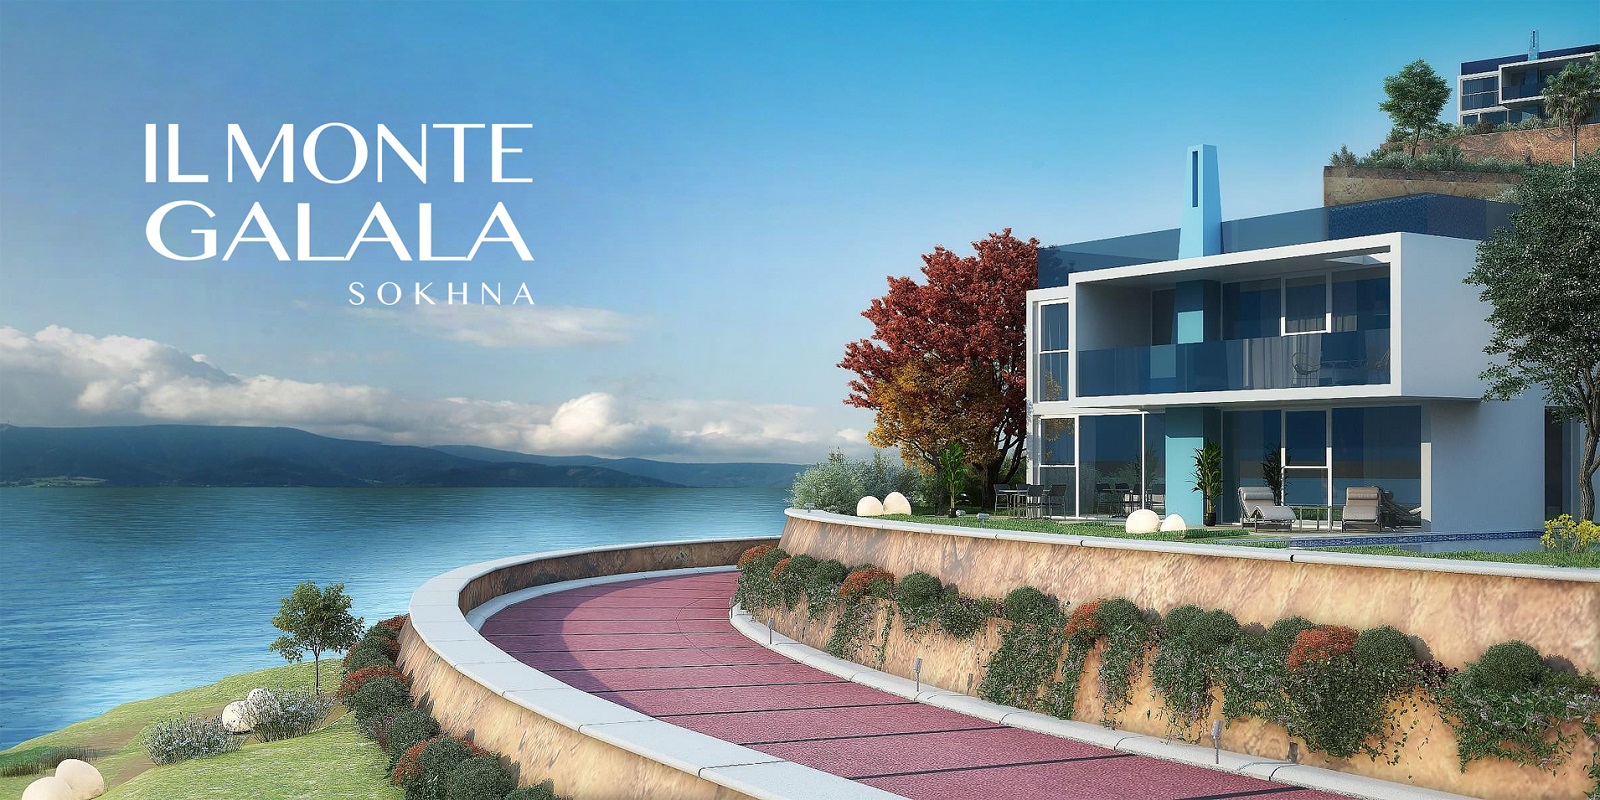 Hurry up to book in IL Monte Galala in units starting from 93 meters